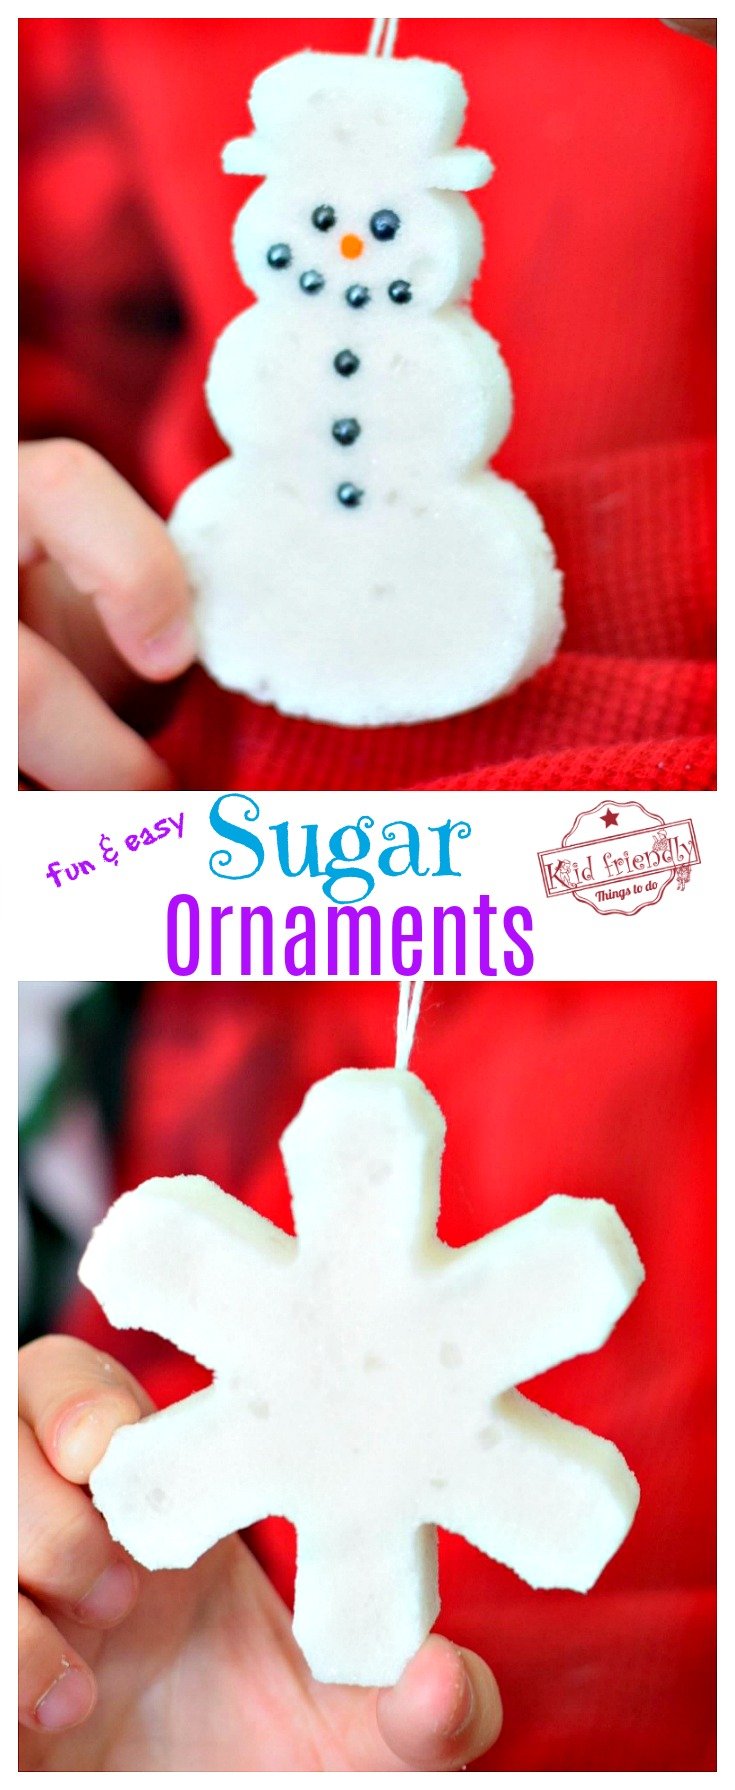 Make Sugar Ornaments With the Kids for a Fun Winter or Christmas Craft - Use cookie cutters to shape a snowflake, snowman Christmas tree and more! perfect for preschool, older kids or adults! www.kidfriendlythingstodo.com